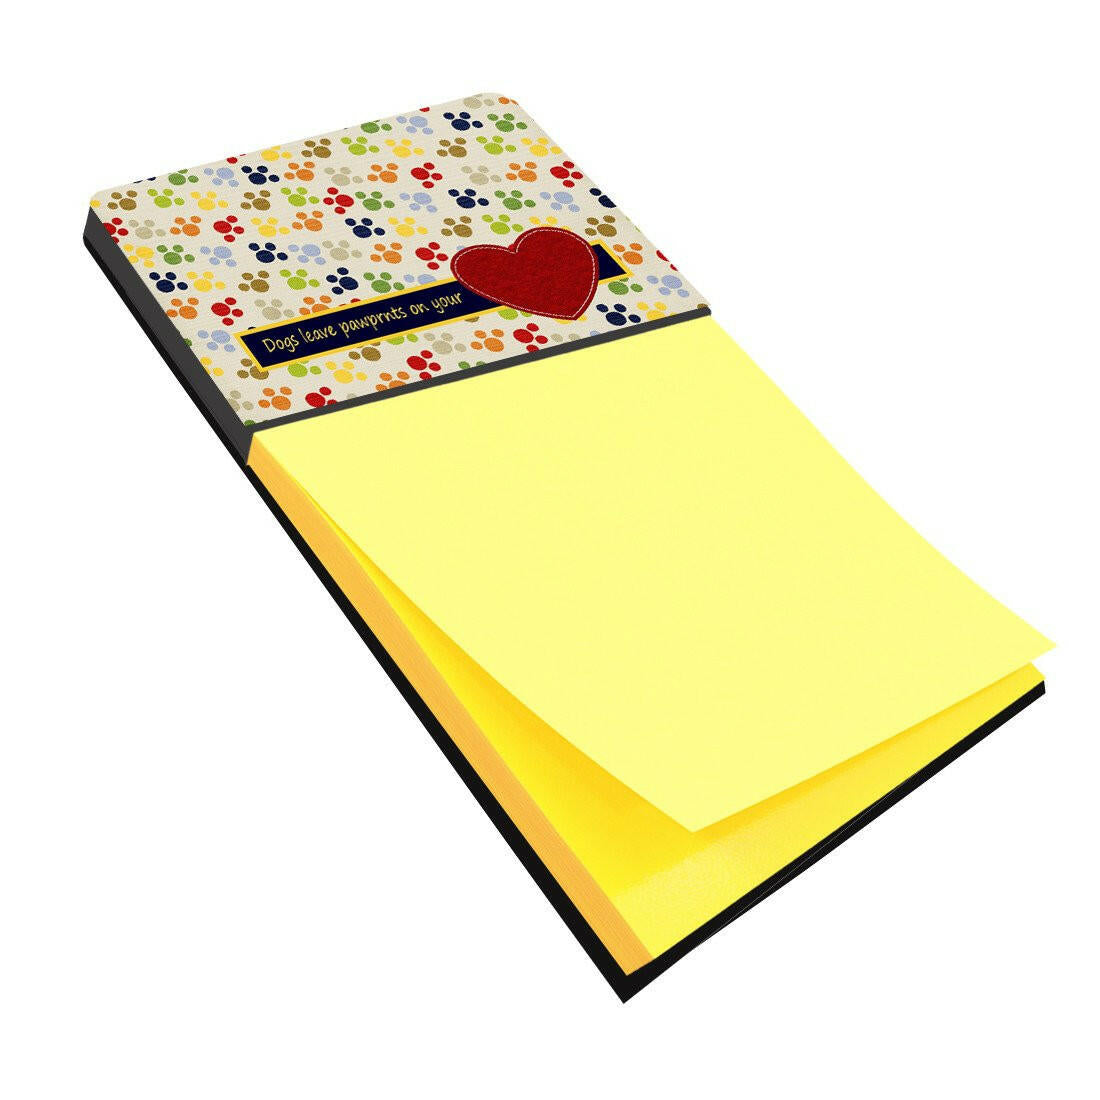 Dogs leave pawprints on your heart Refiillable Sticky Note Holder or Postit Note Dispenser SB3054SN by Caroline's Treasures